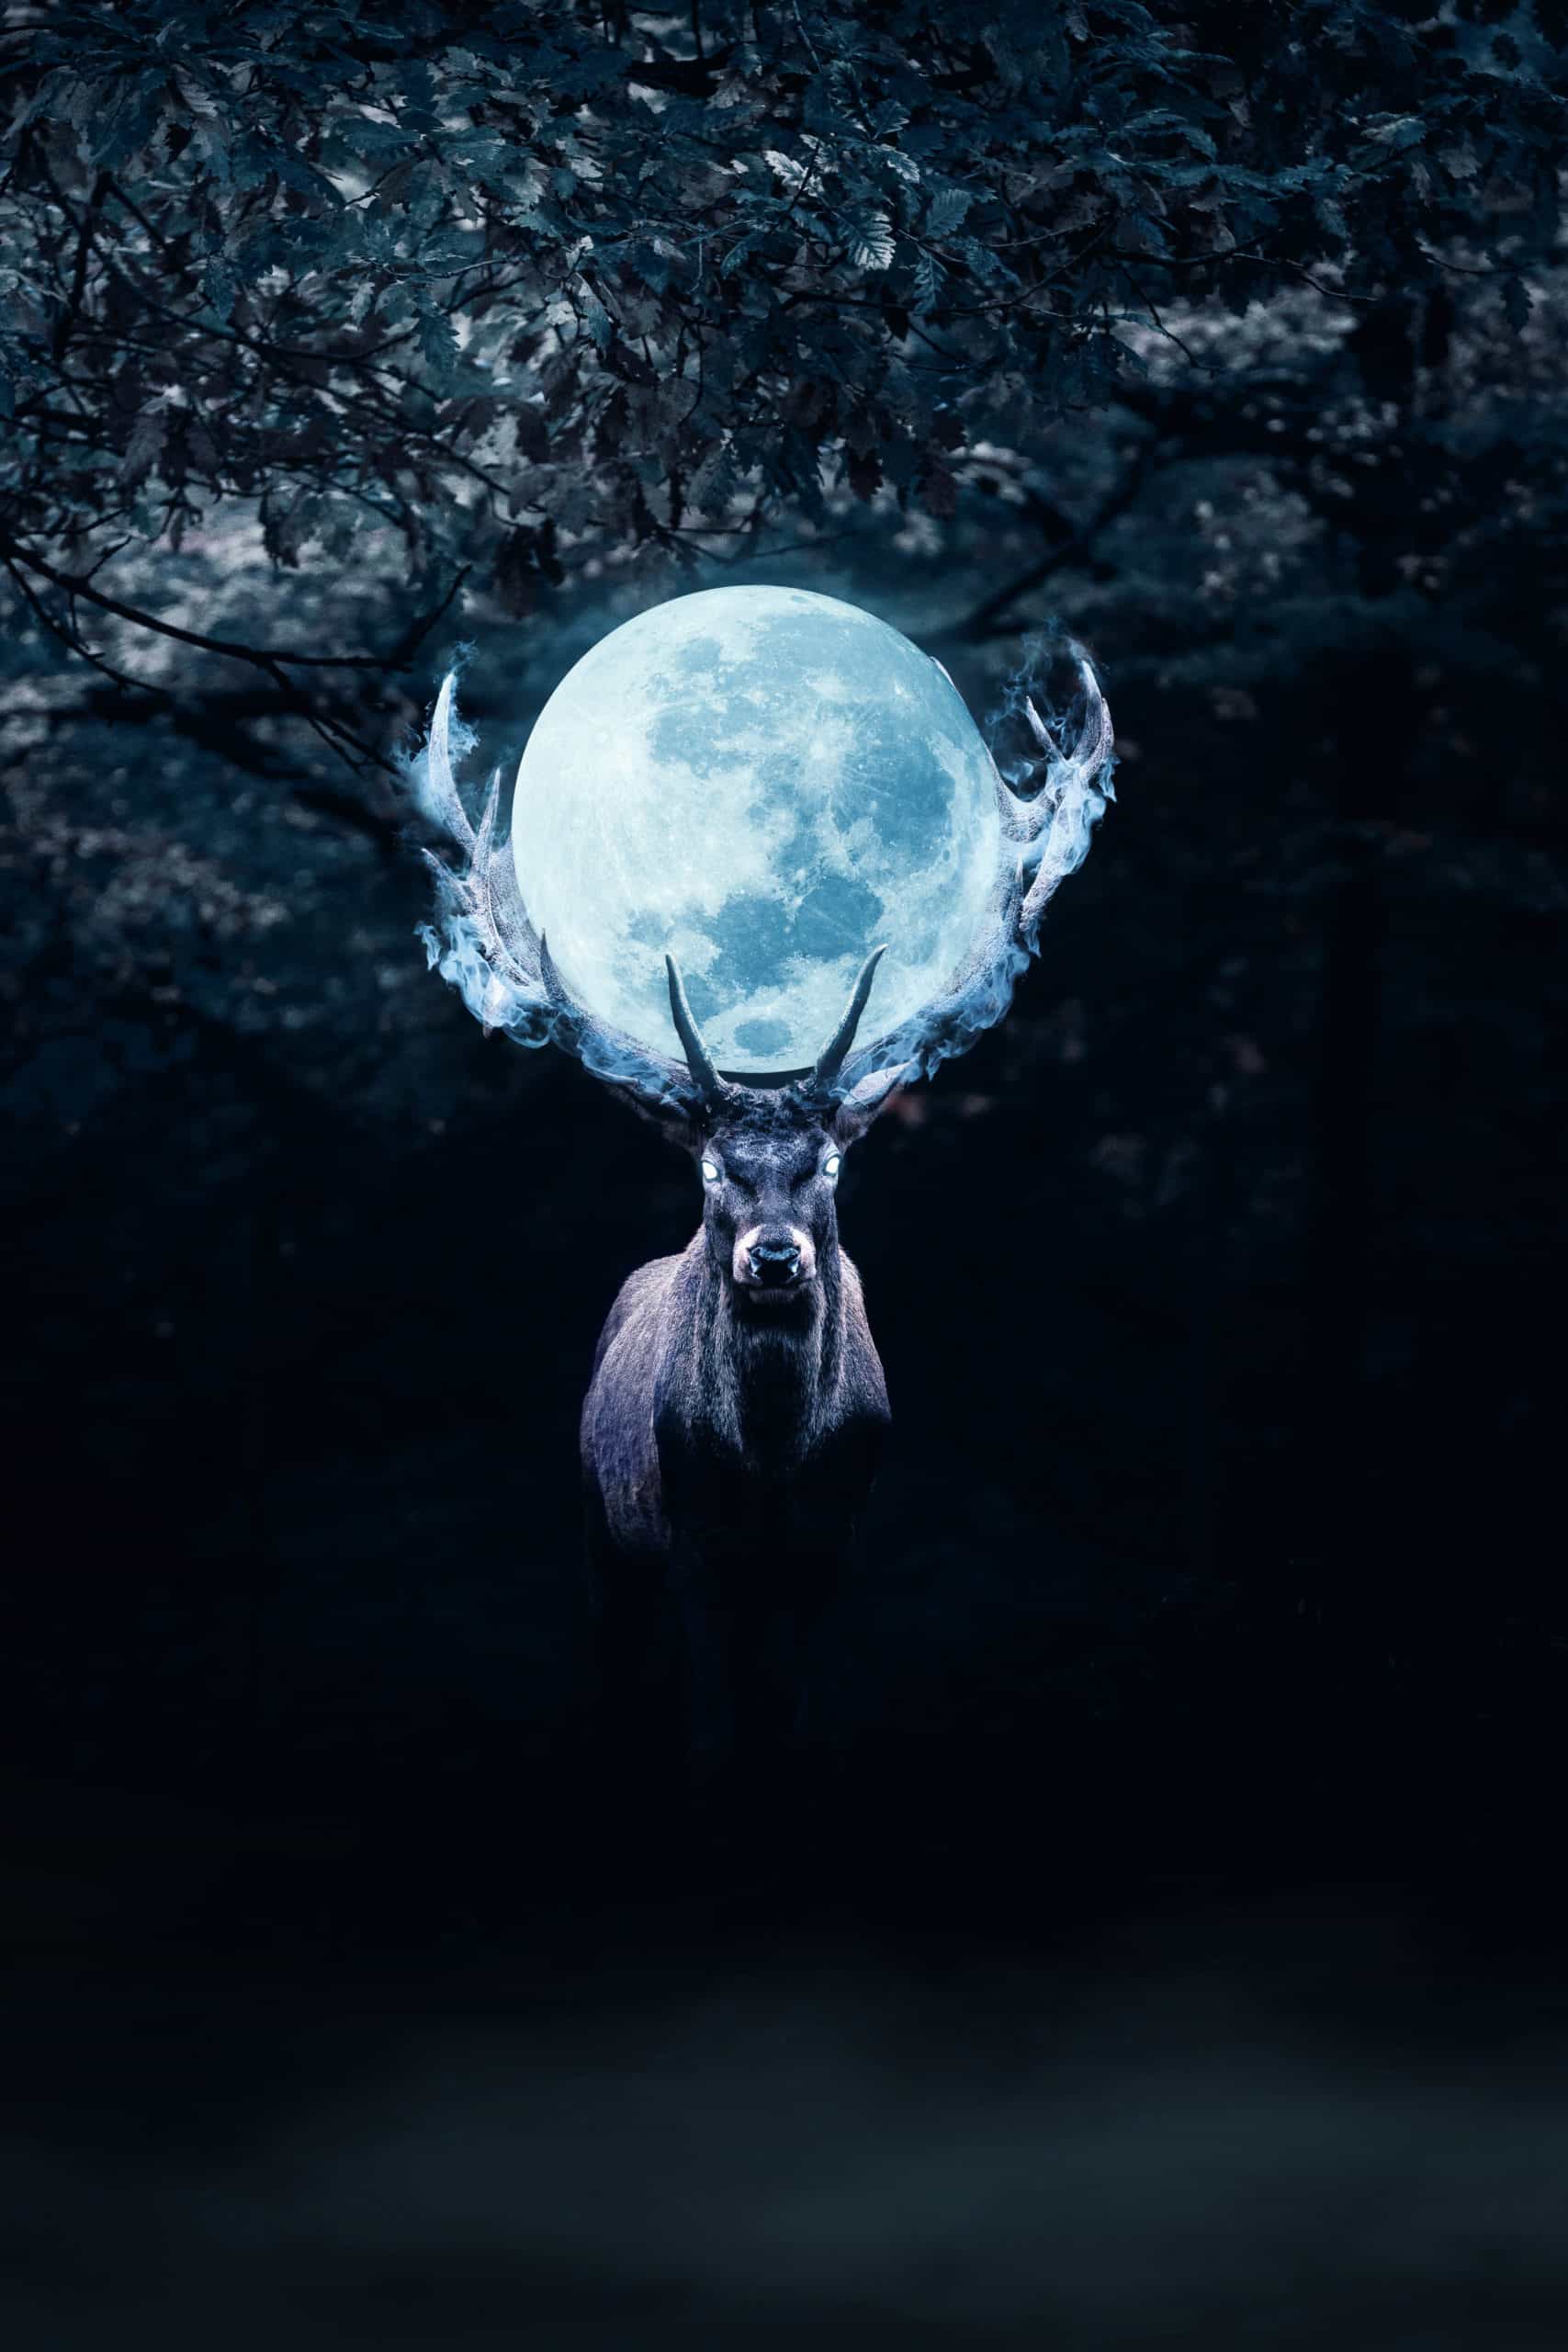 Mysterious Deer in Night Photoshop Manipulation